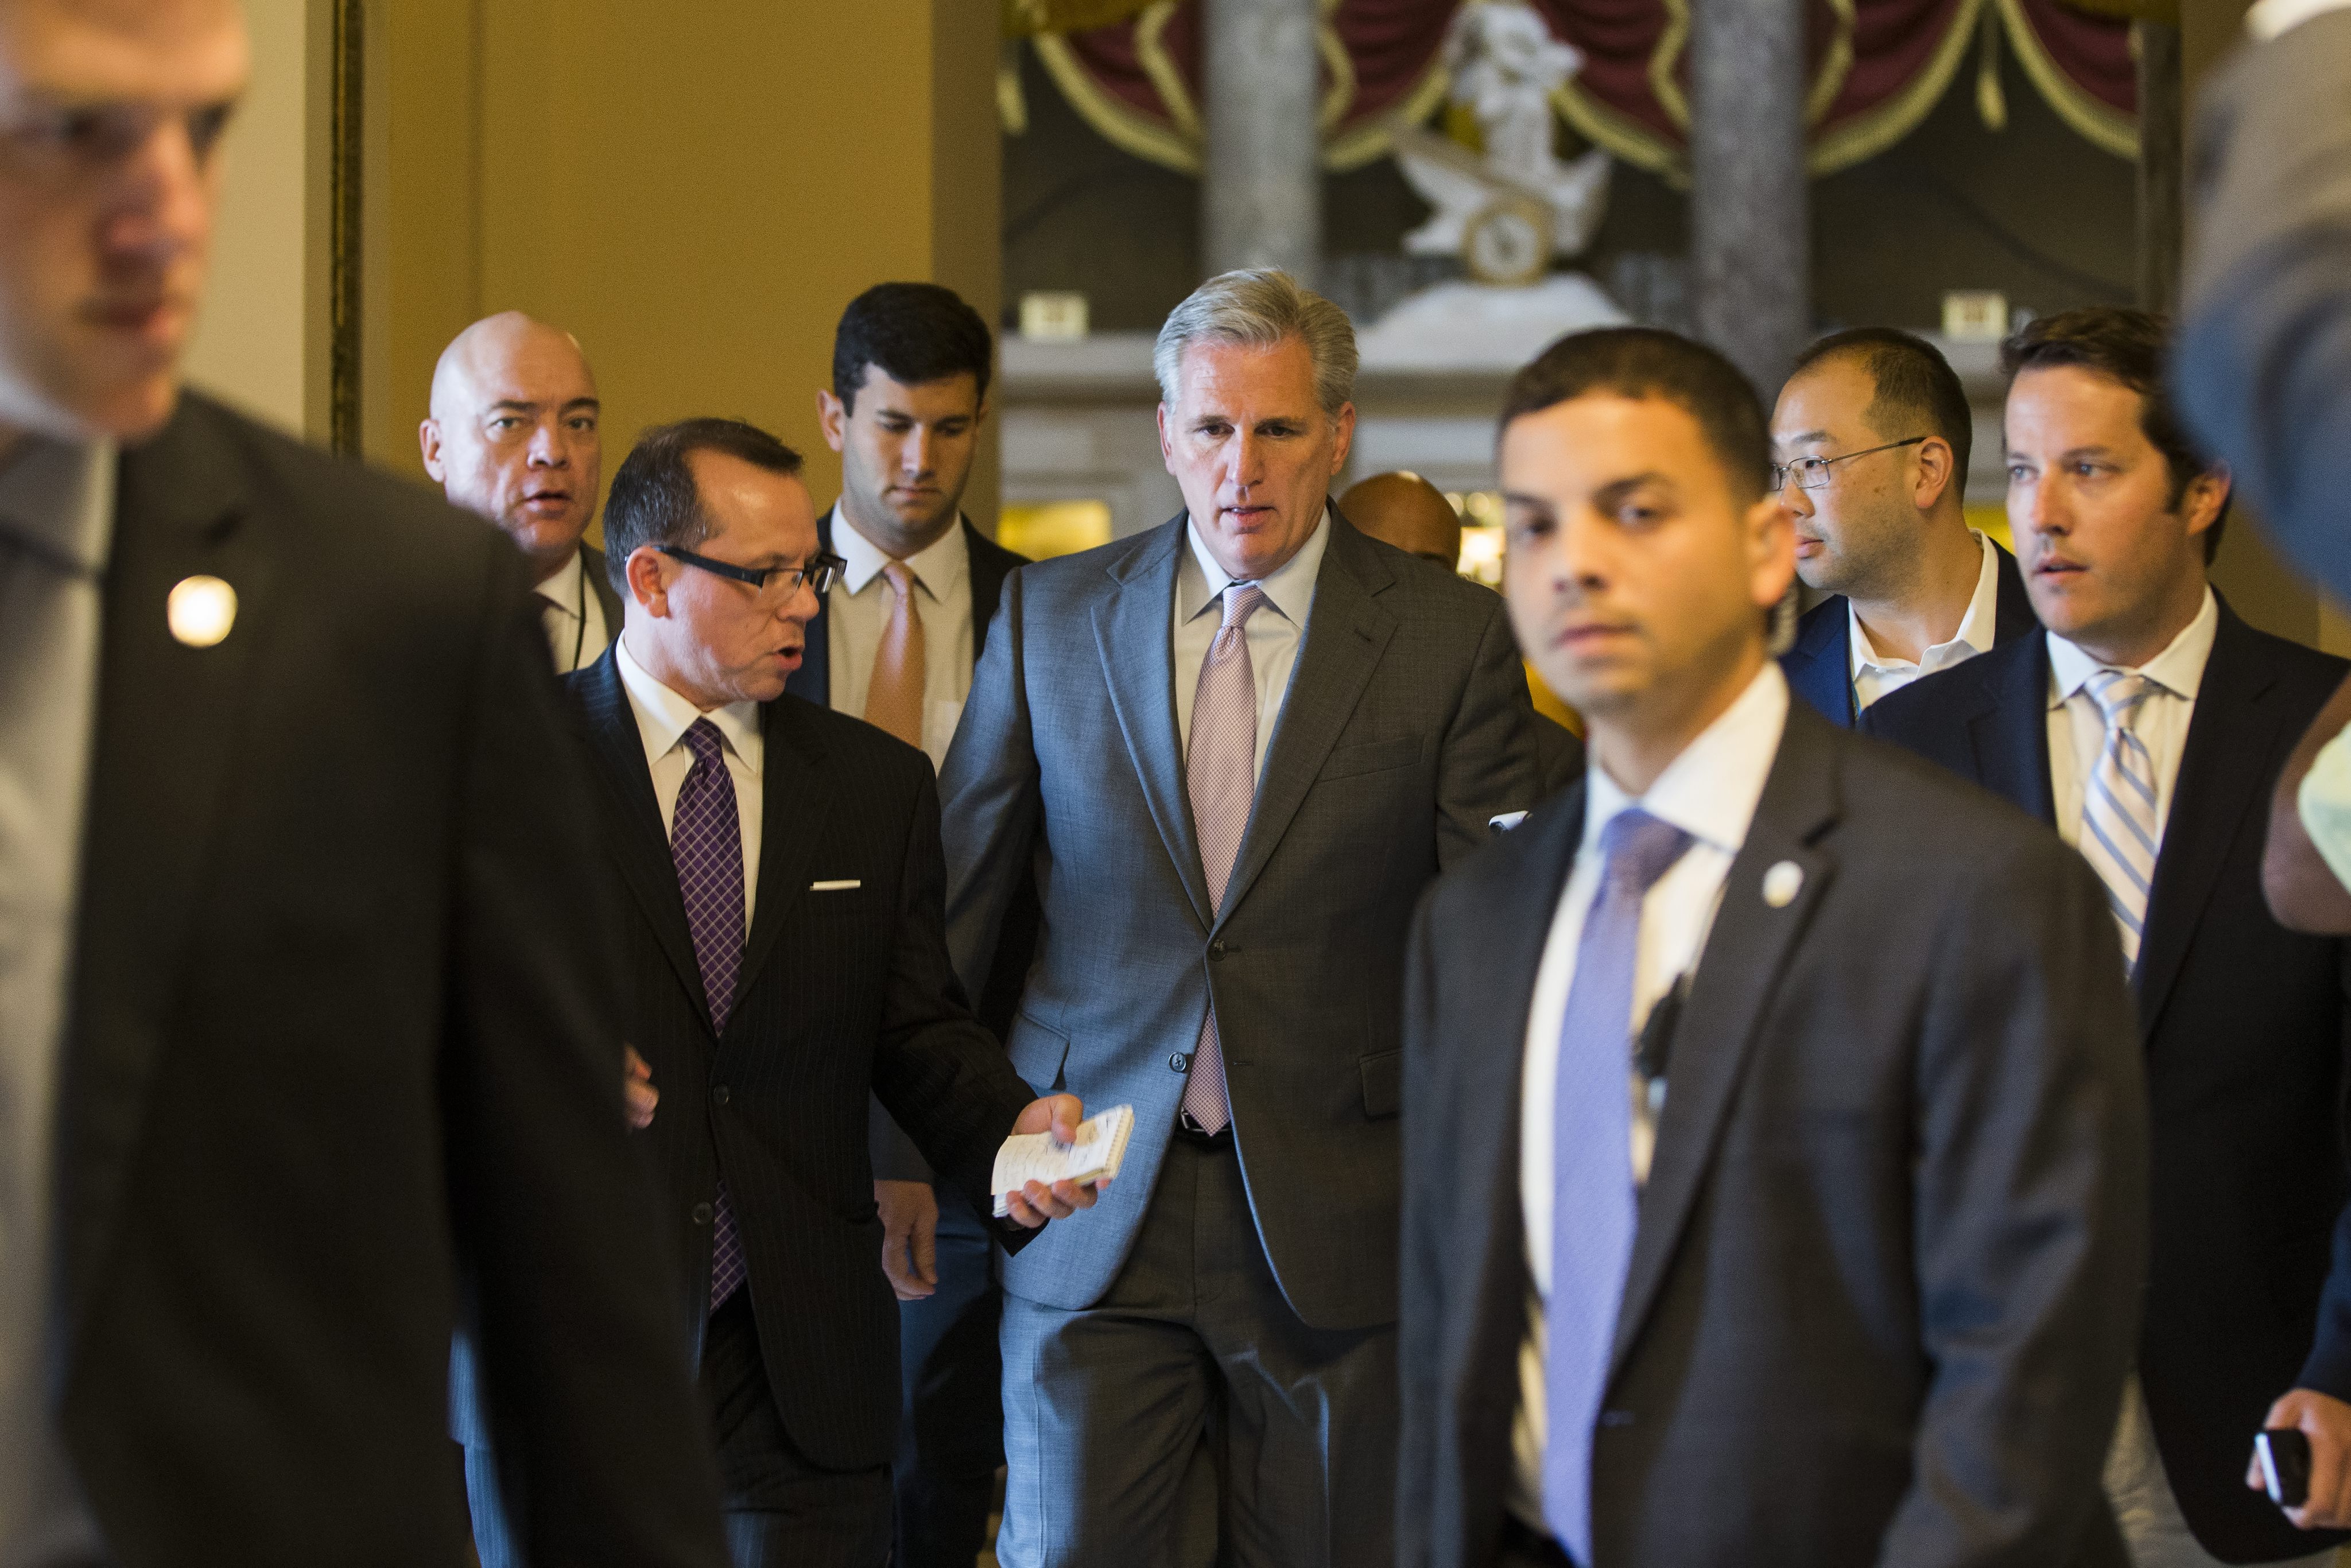 House Majority Leader Kevin McCarthy is expected to run for speaker of the House. (Photo: Jim Lo Scalzo/EPA/Newsom)